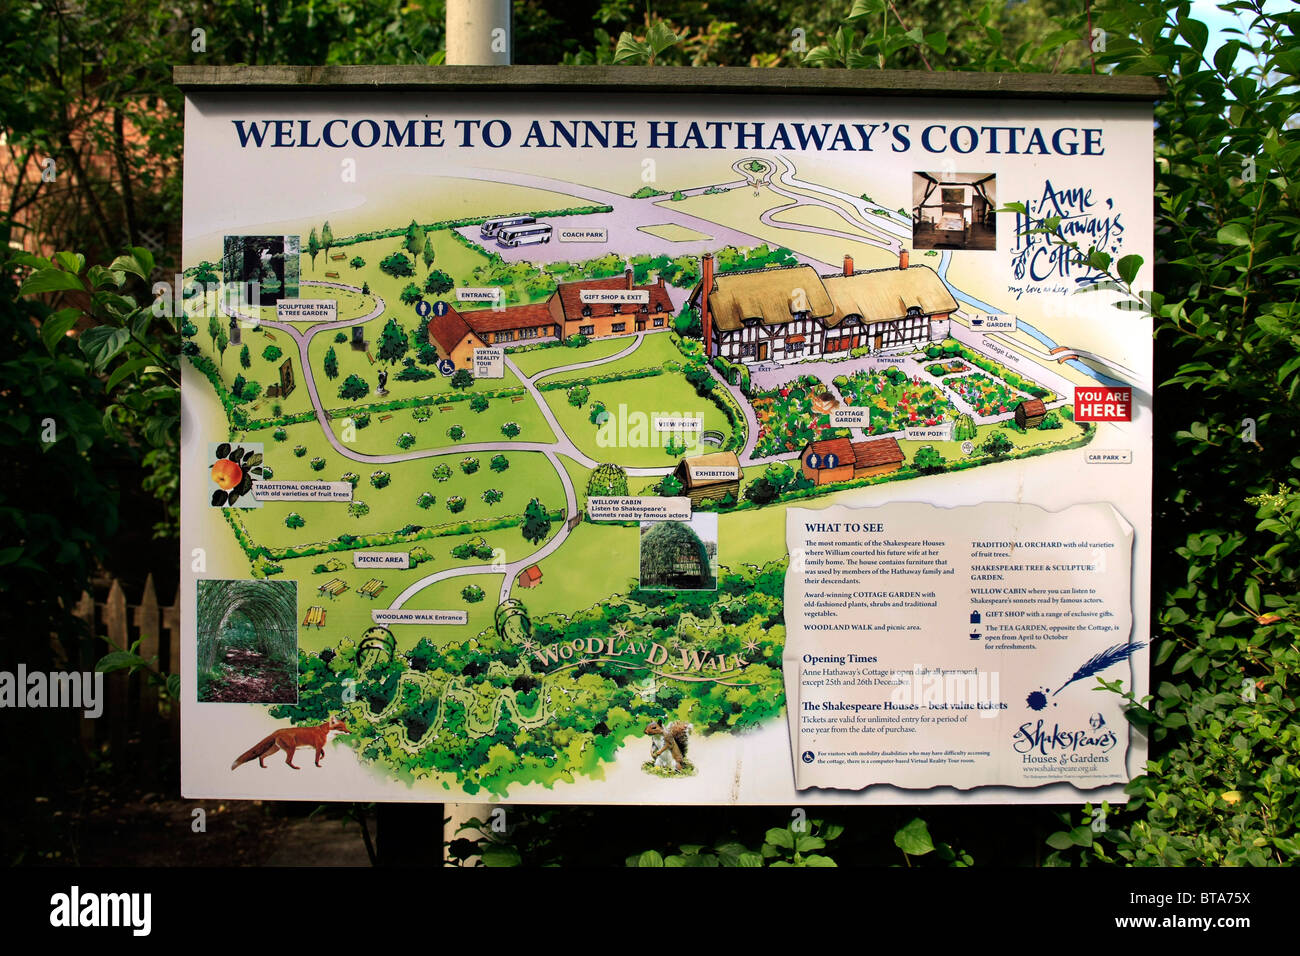 Welcome Sign And Map To Anne Hathaway S Cottage In Warwickshire Stock Photo Alamy